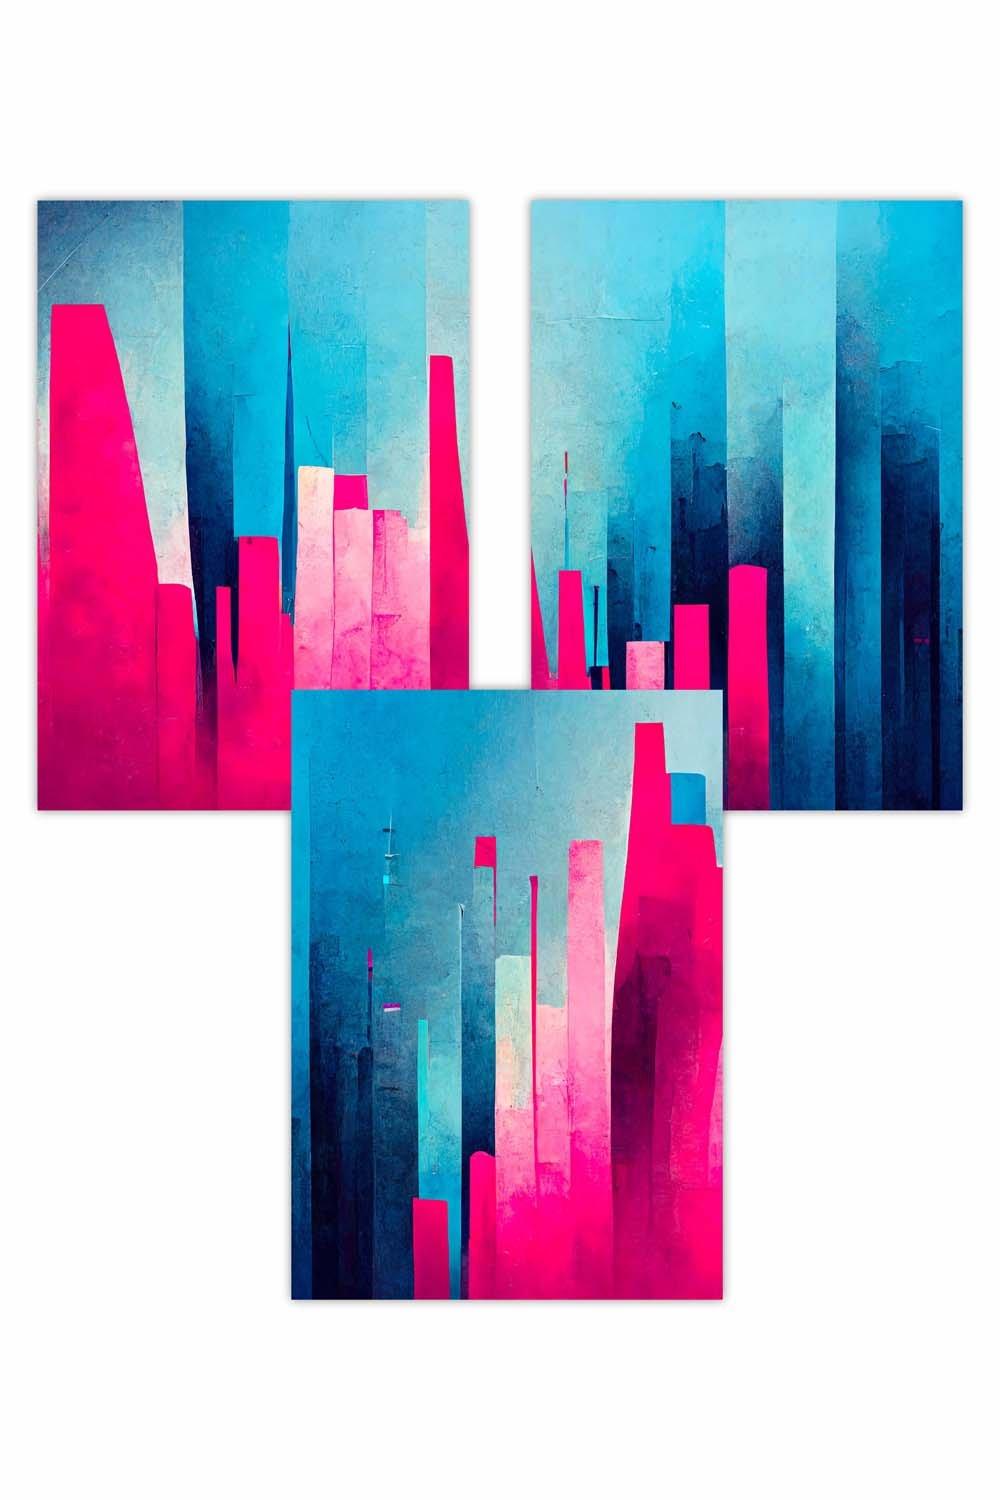 Set of 3 Geometric Abstract Bright Blue and Hot Pink Miami Art Posters